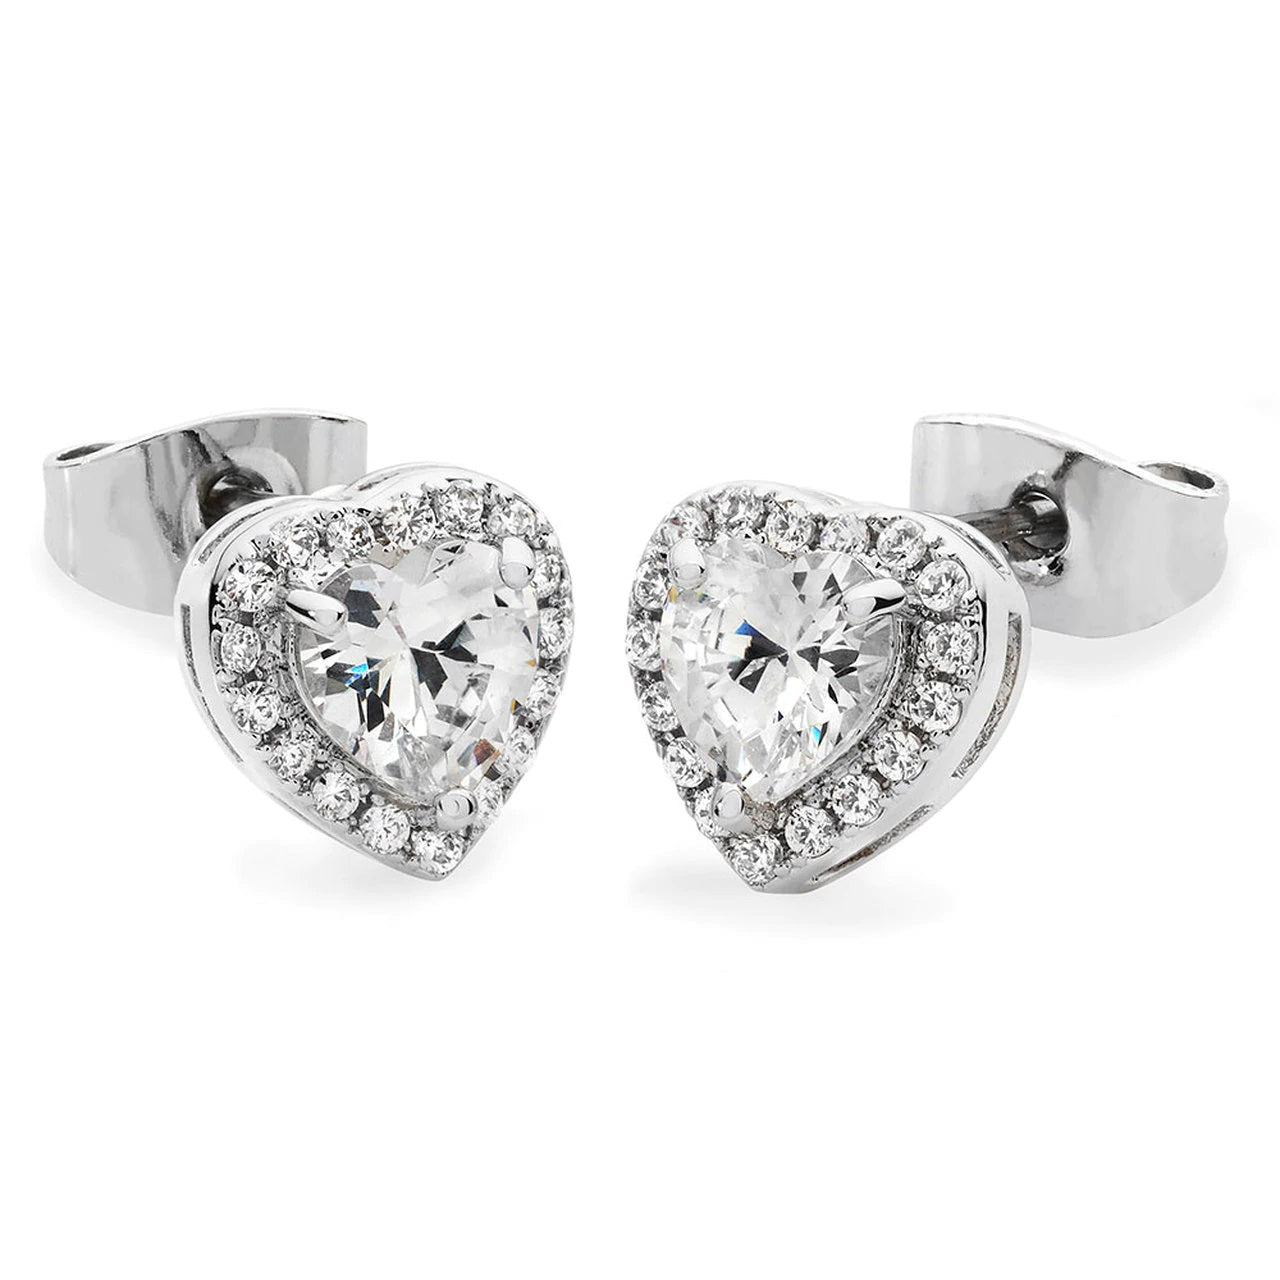 Tipperary Crystal Diamante Heart Stud Earrings Silver  Crafted in silver, each eye-catching stud earring features an enchanting heart-shaped clear crystal center stone framed with a border of shimmering crystal accents. Buffed to a bright lustre, these earrings secure comfortably with push backs.